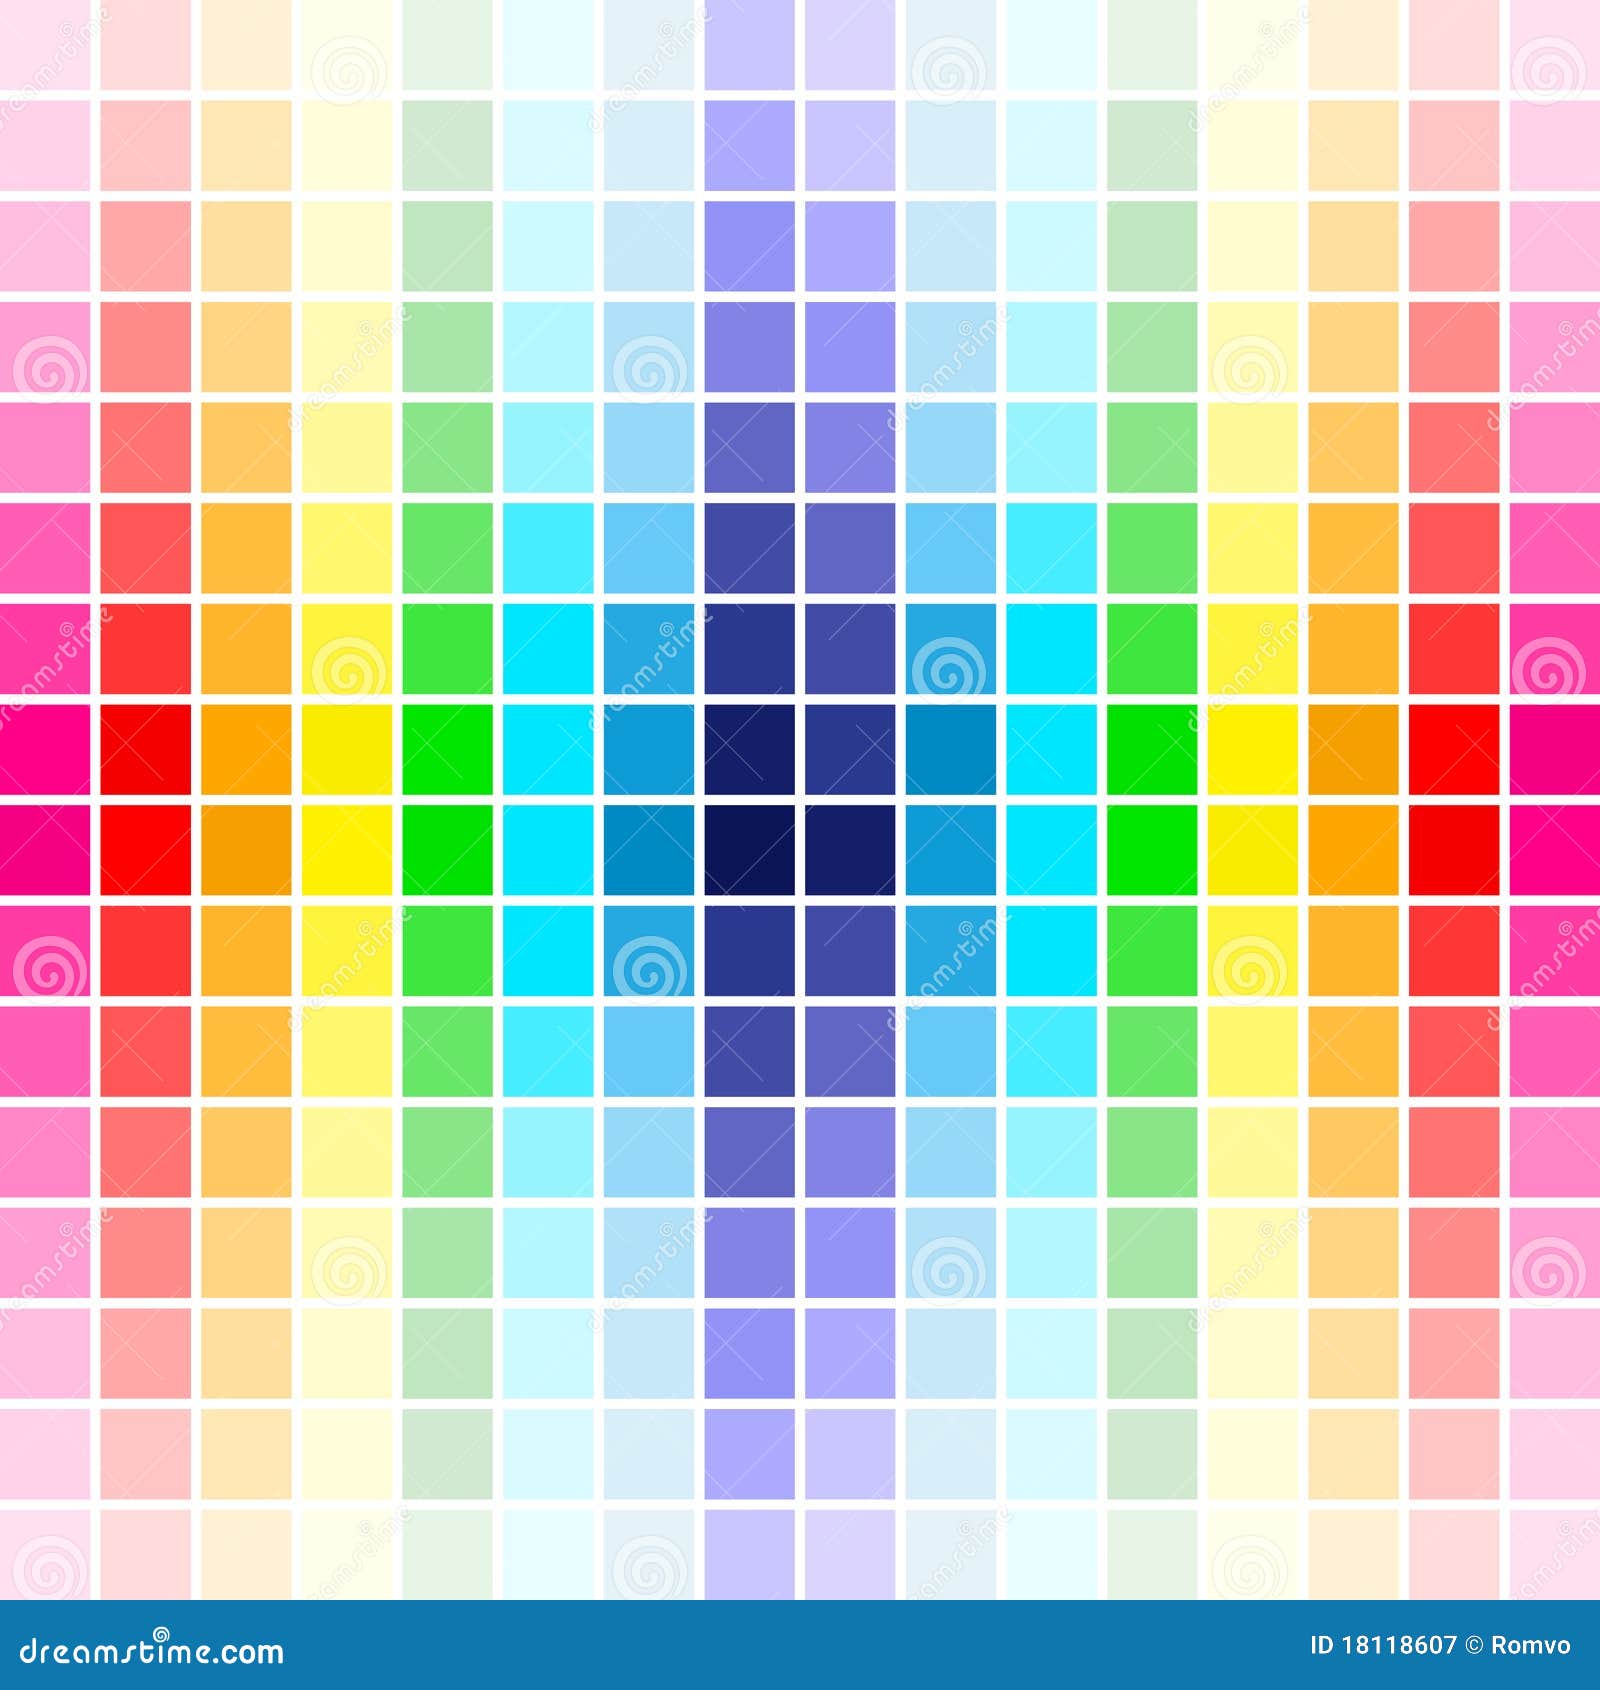 Palette rainbow colors stock vector. Illustration of 